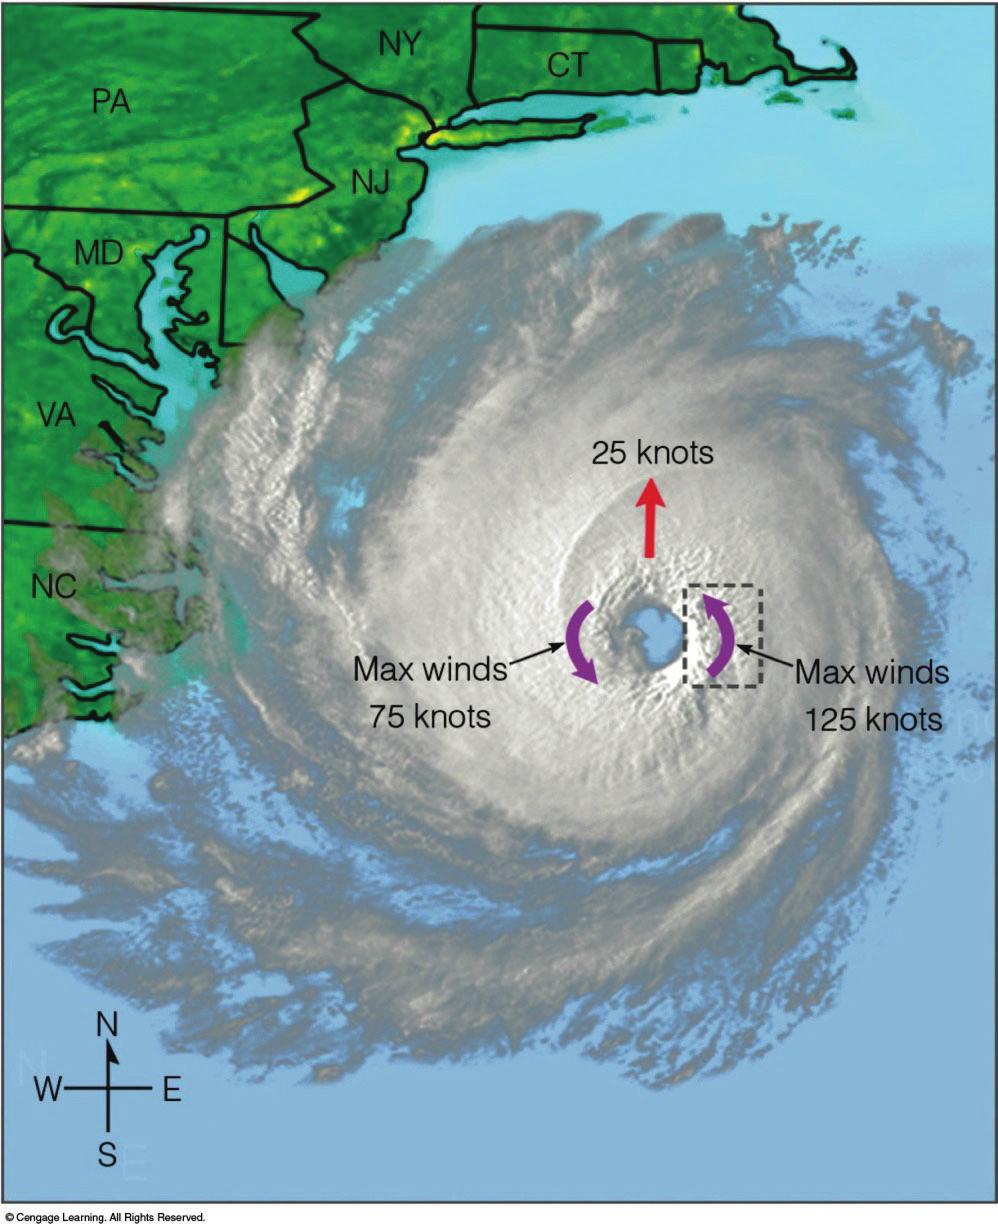 Winds on the right side blow in the same direction as the hurricane is moving.